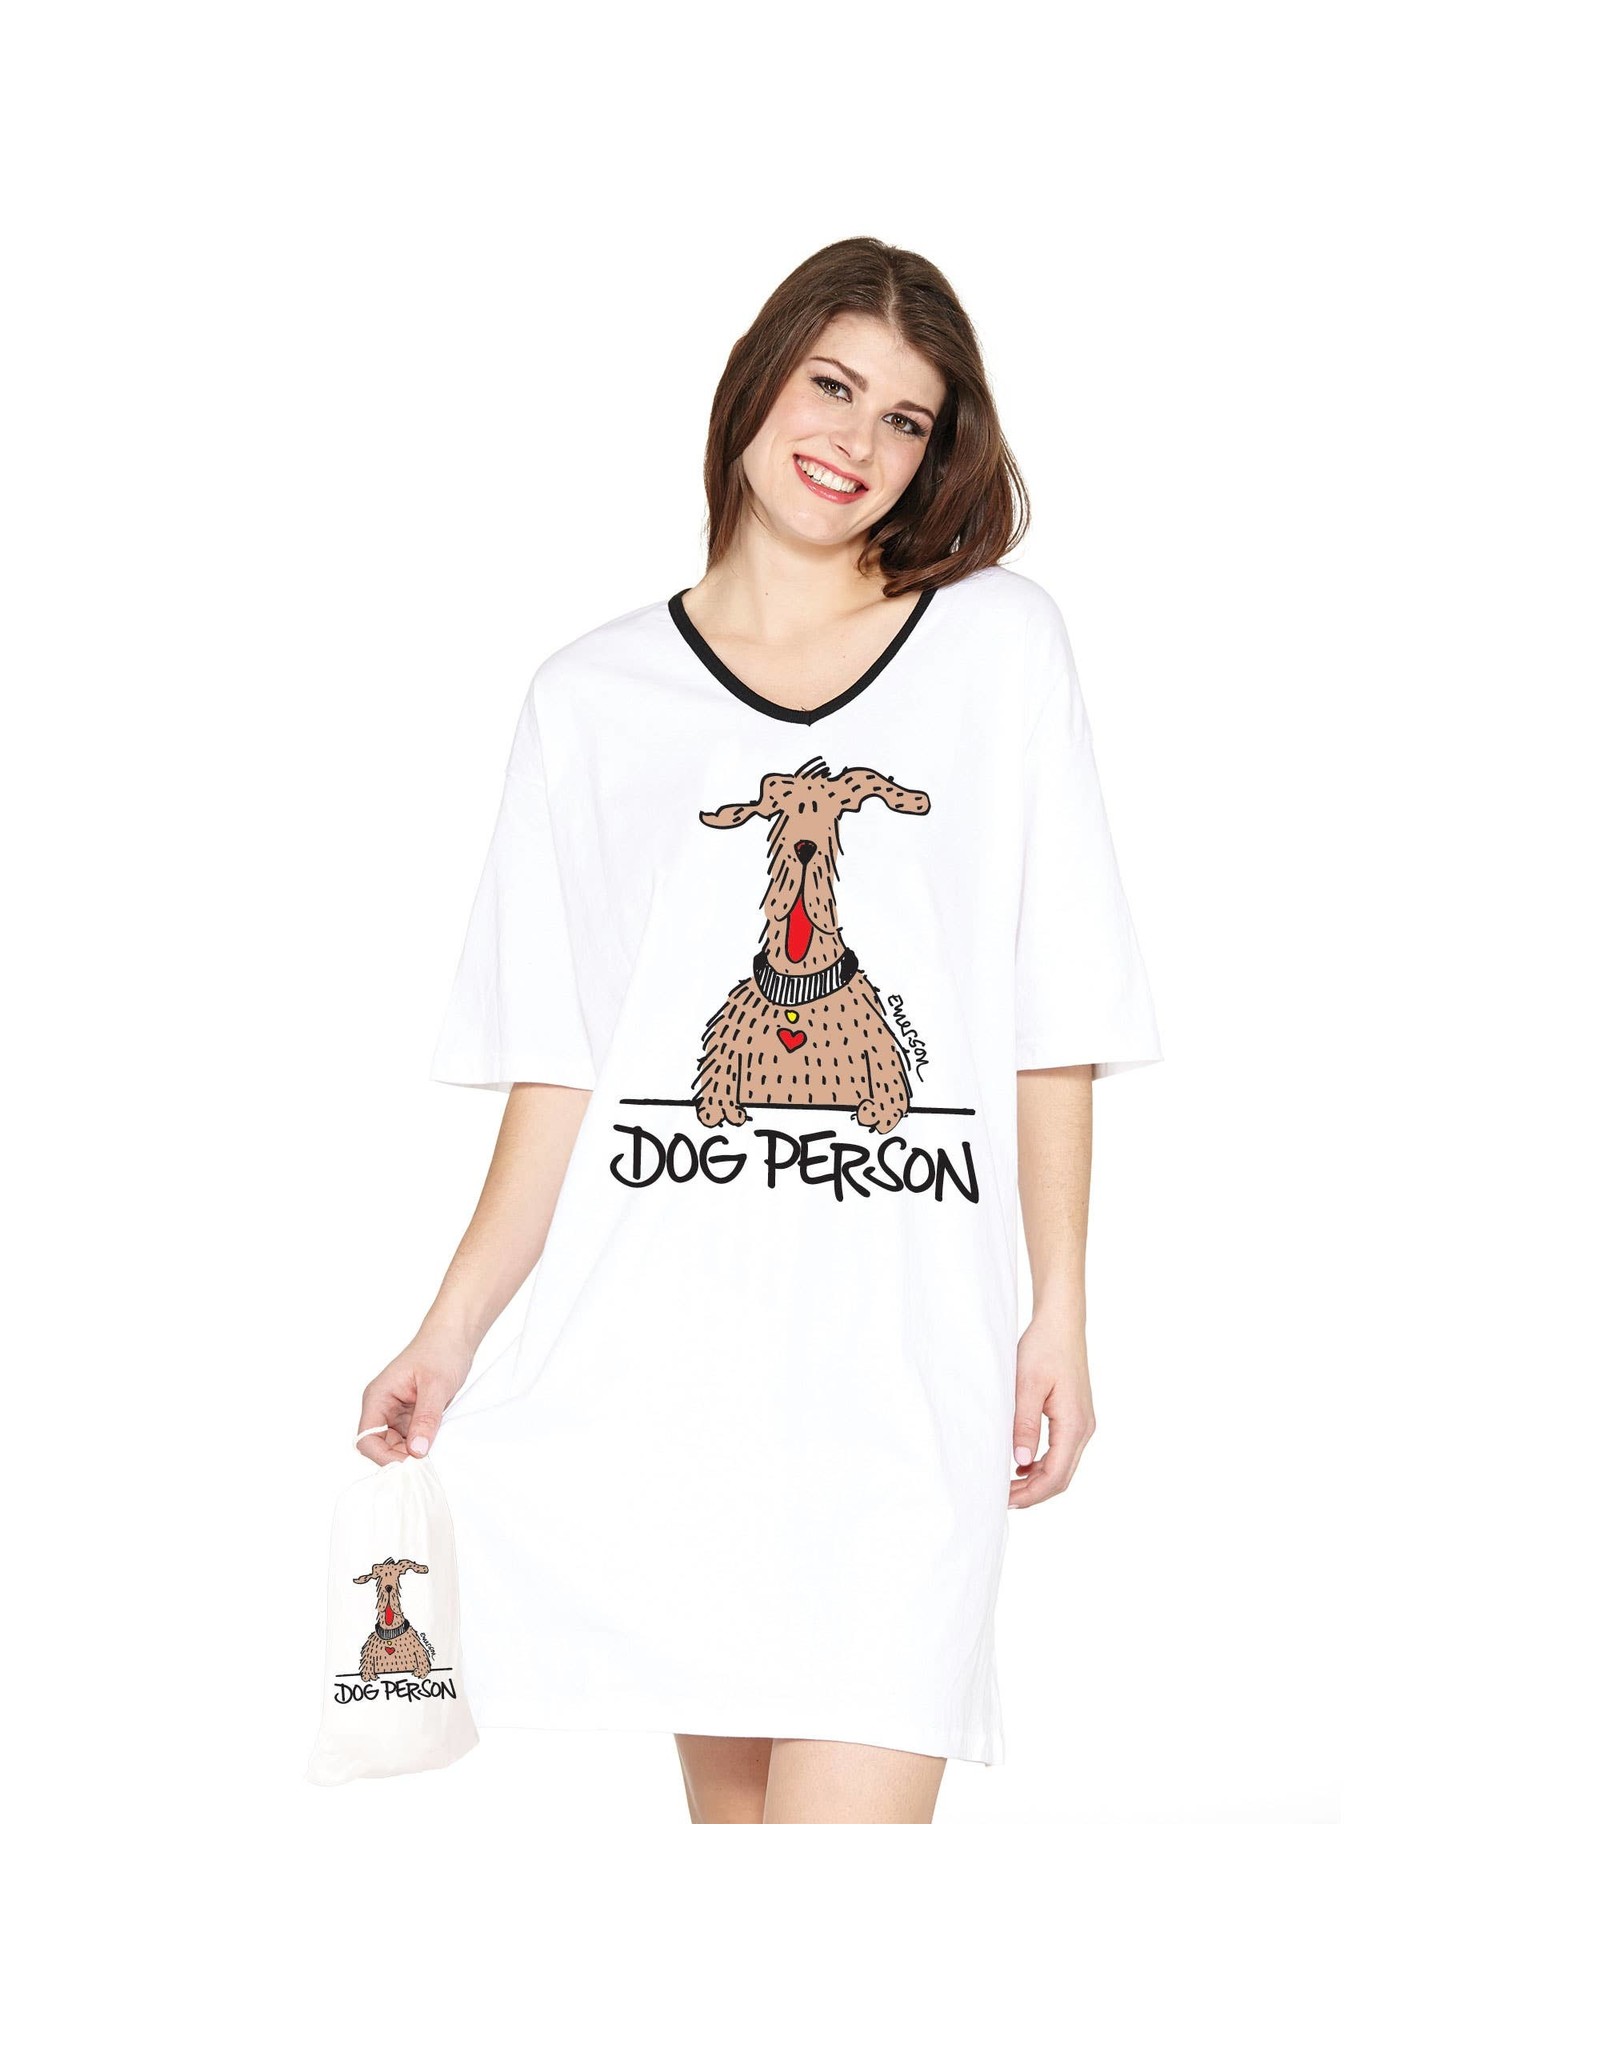 Dog Person, Nightshirt in a Bag